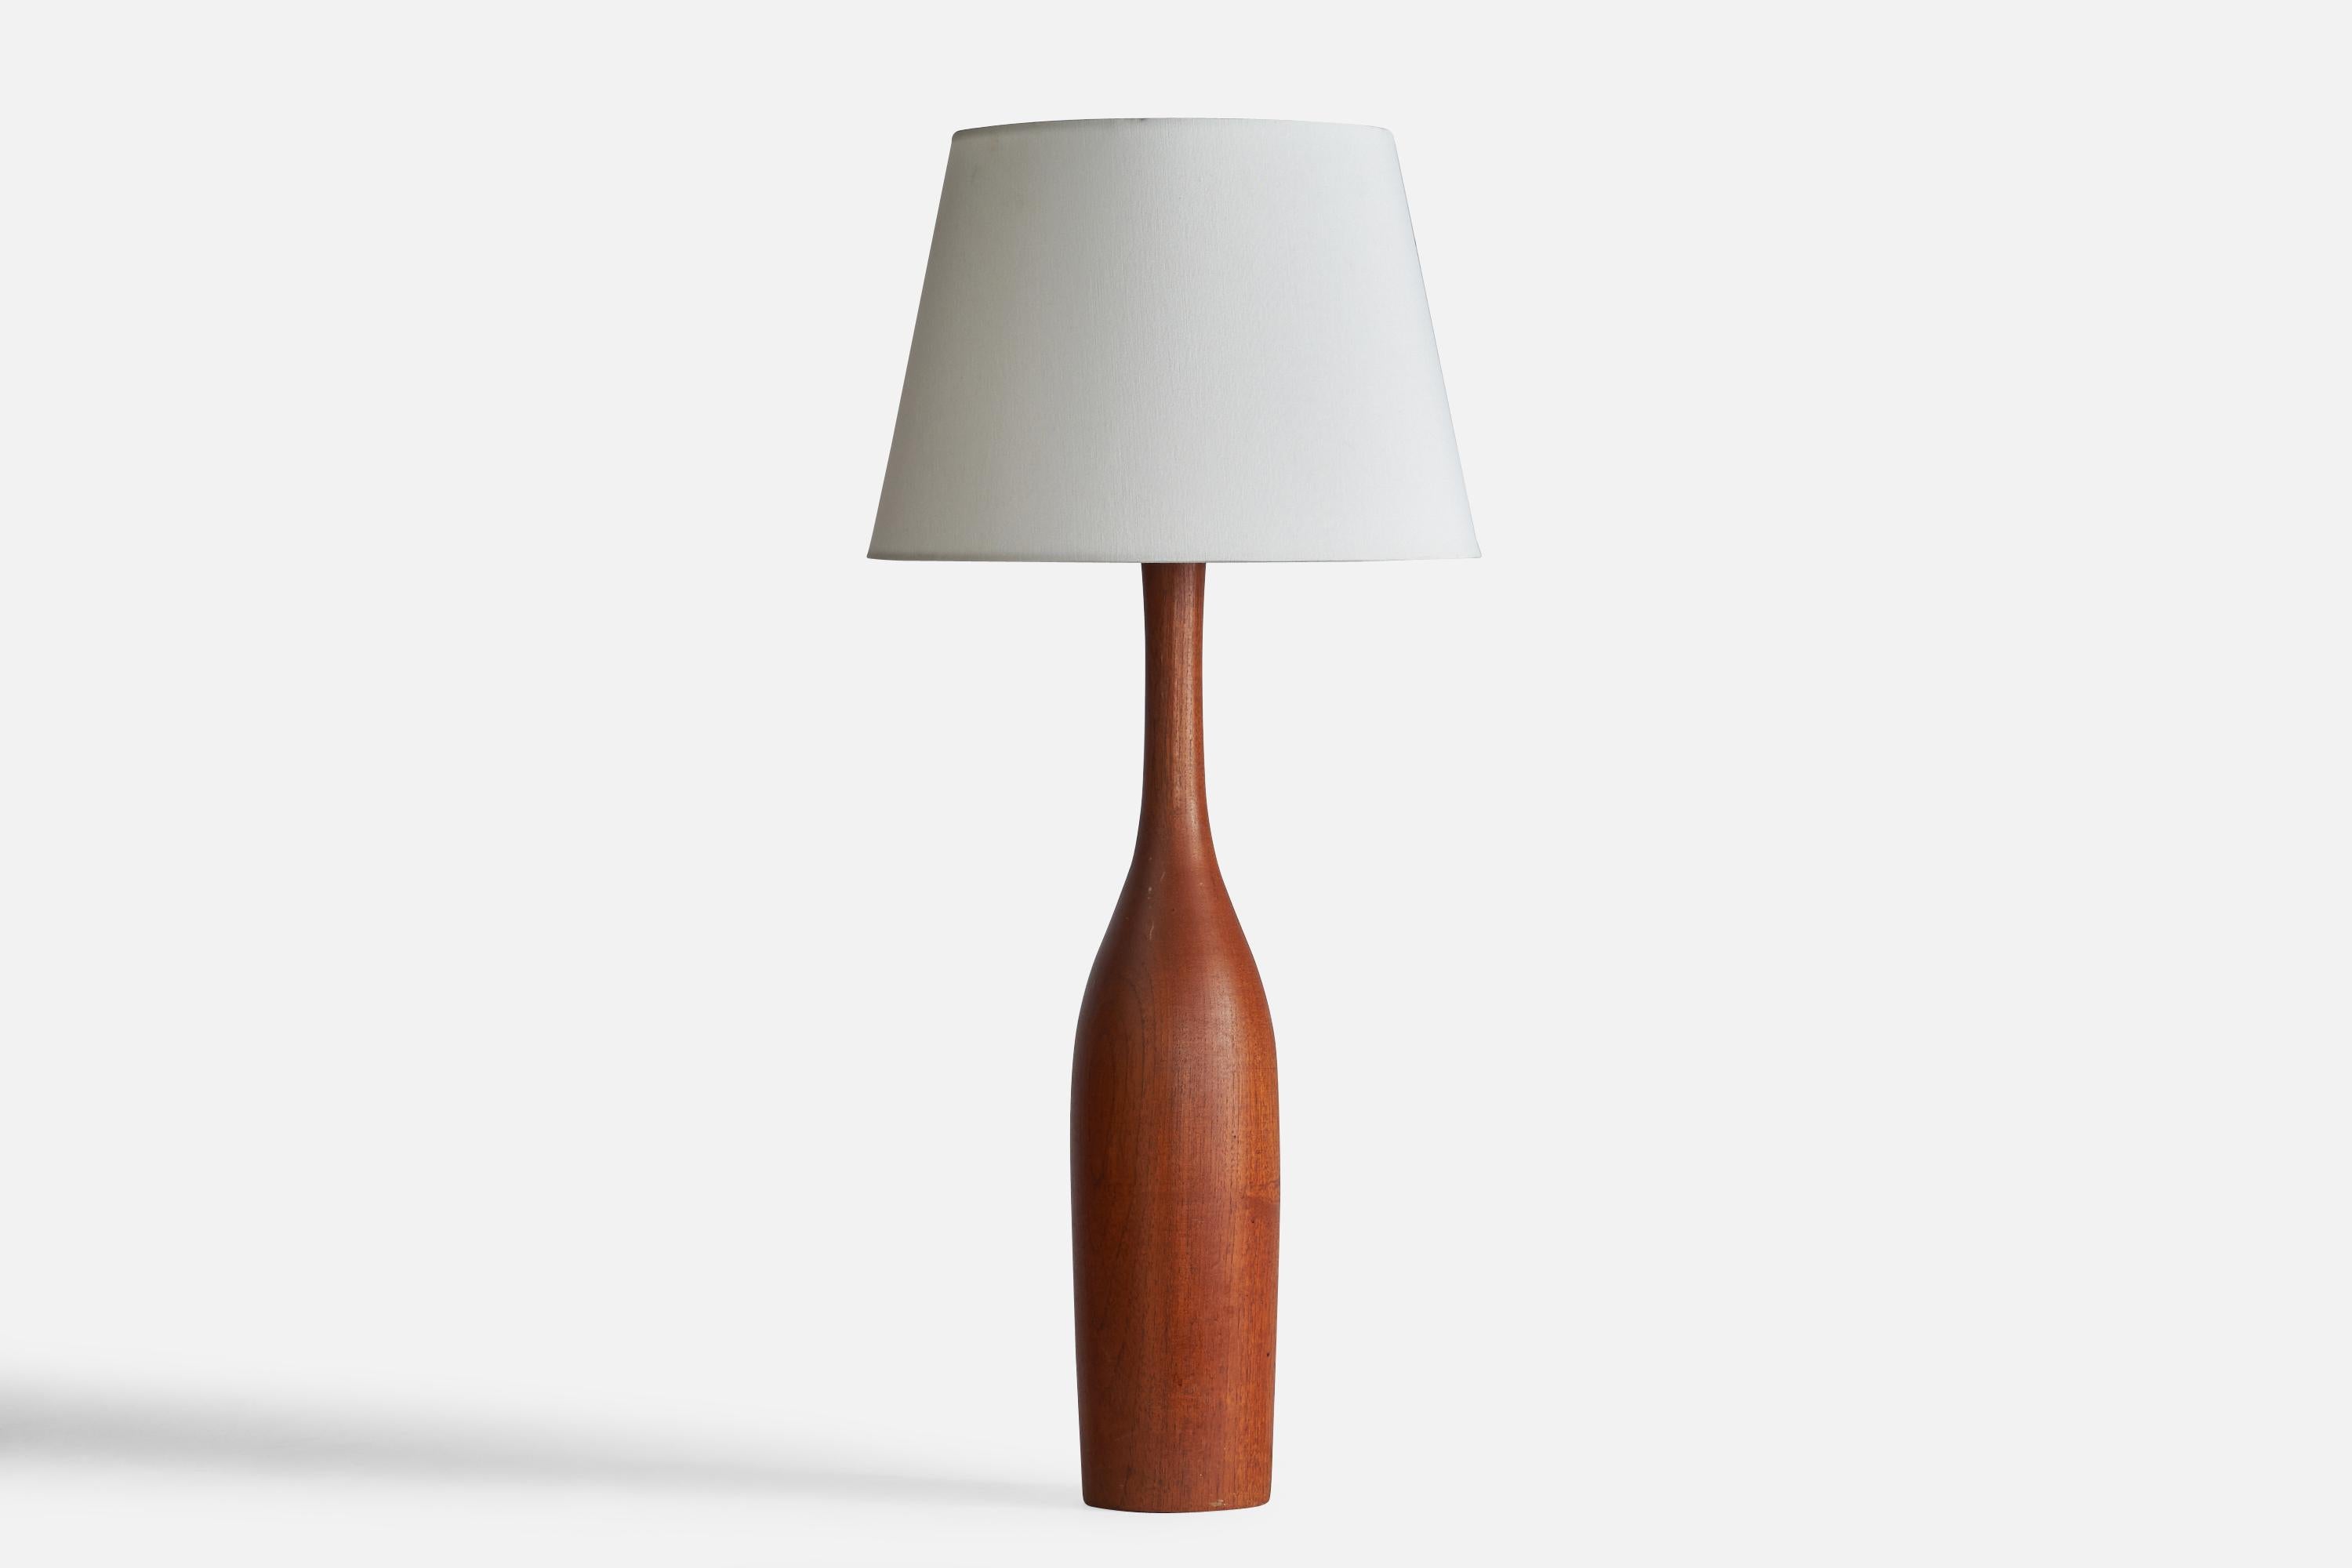 A large teak and brass table lamp designed and produced in Sweden, 1960s.

Dimensions of Lamp (inches): 24.5” H x 4.75” Diameter
Dimensions of Shade (inches): 9” Top Diameter x 12” Bottom Diameter x 9” H
Dimensions of Lamp with Shade (inches):